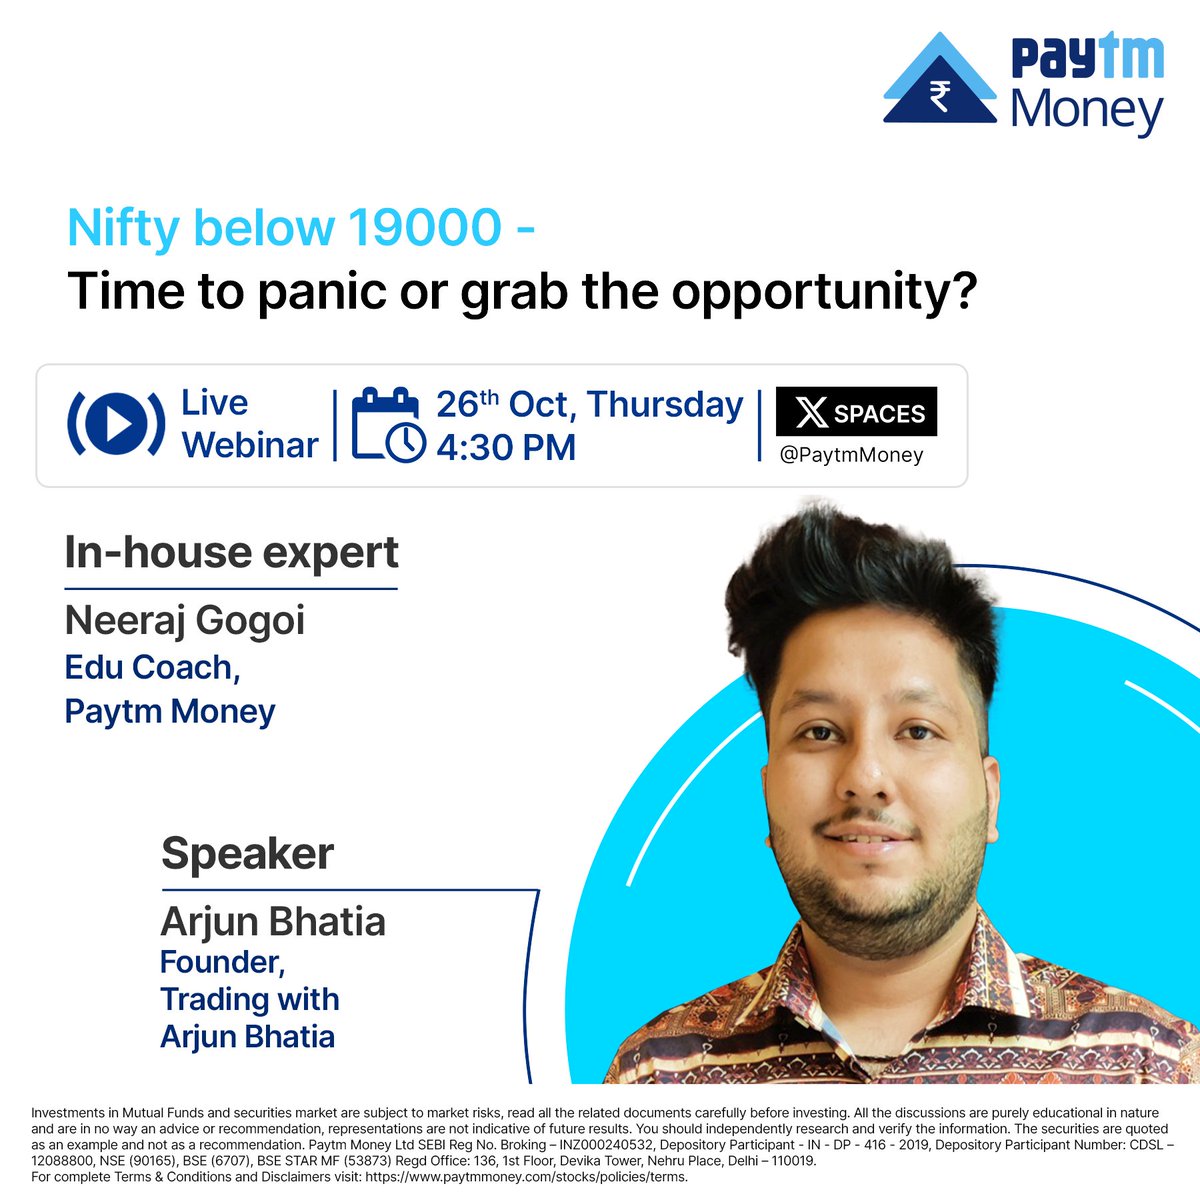 Nifty dips below 19,000, is the market correction here? Join us for an exclusive session with @ArjunB9591, Founder, Trading with Arjun Bhatia as he shares his insights on this & more! 📅 - 26 October, Today ⏰ - 4:30 PM Join here - twitter.com/i/spaces/1jMKg…